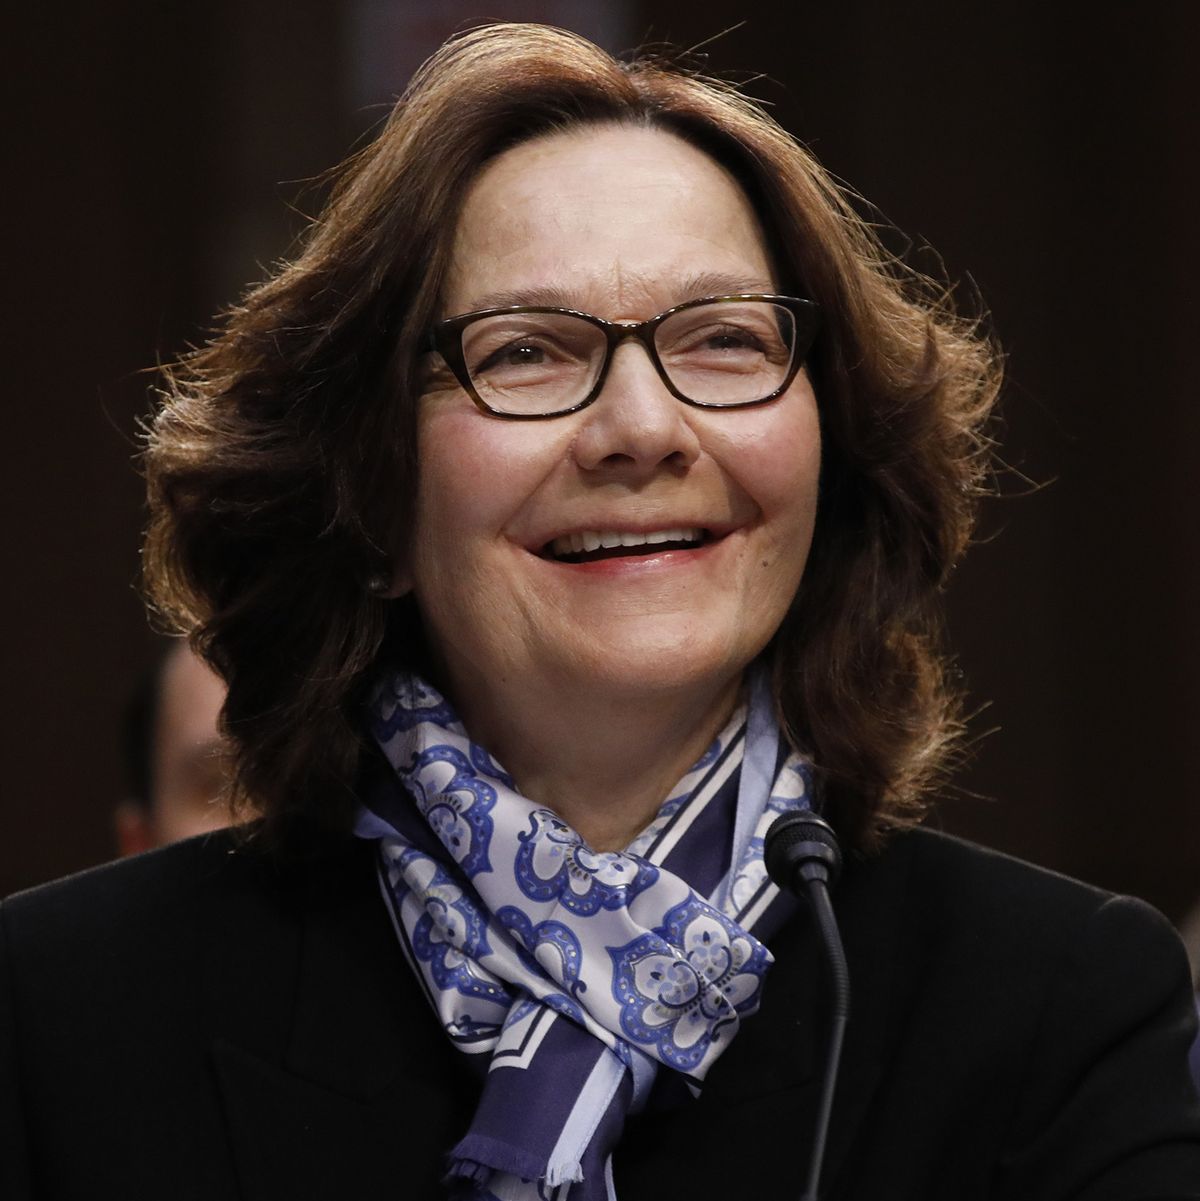 Agency Chiefs Testify On Worldwide Threats To Senate Intelligence CommitteeGina Haspel, director of the Central Intelligence Agency (CIA), smiles while testifying during a Senate Intelligence Committee hearing in Washington, D.C., U.S., on Tuesday, Jan. 29, 2019. Haspel said "a very robust monitoring regime" would be necessary under a potential U.S. peace accord with the Taliban in Afghanistan. Photographer: Aaron P. Bernstein/Bloomberg via Getty Images